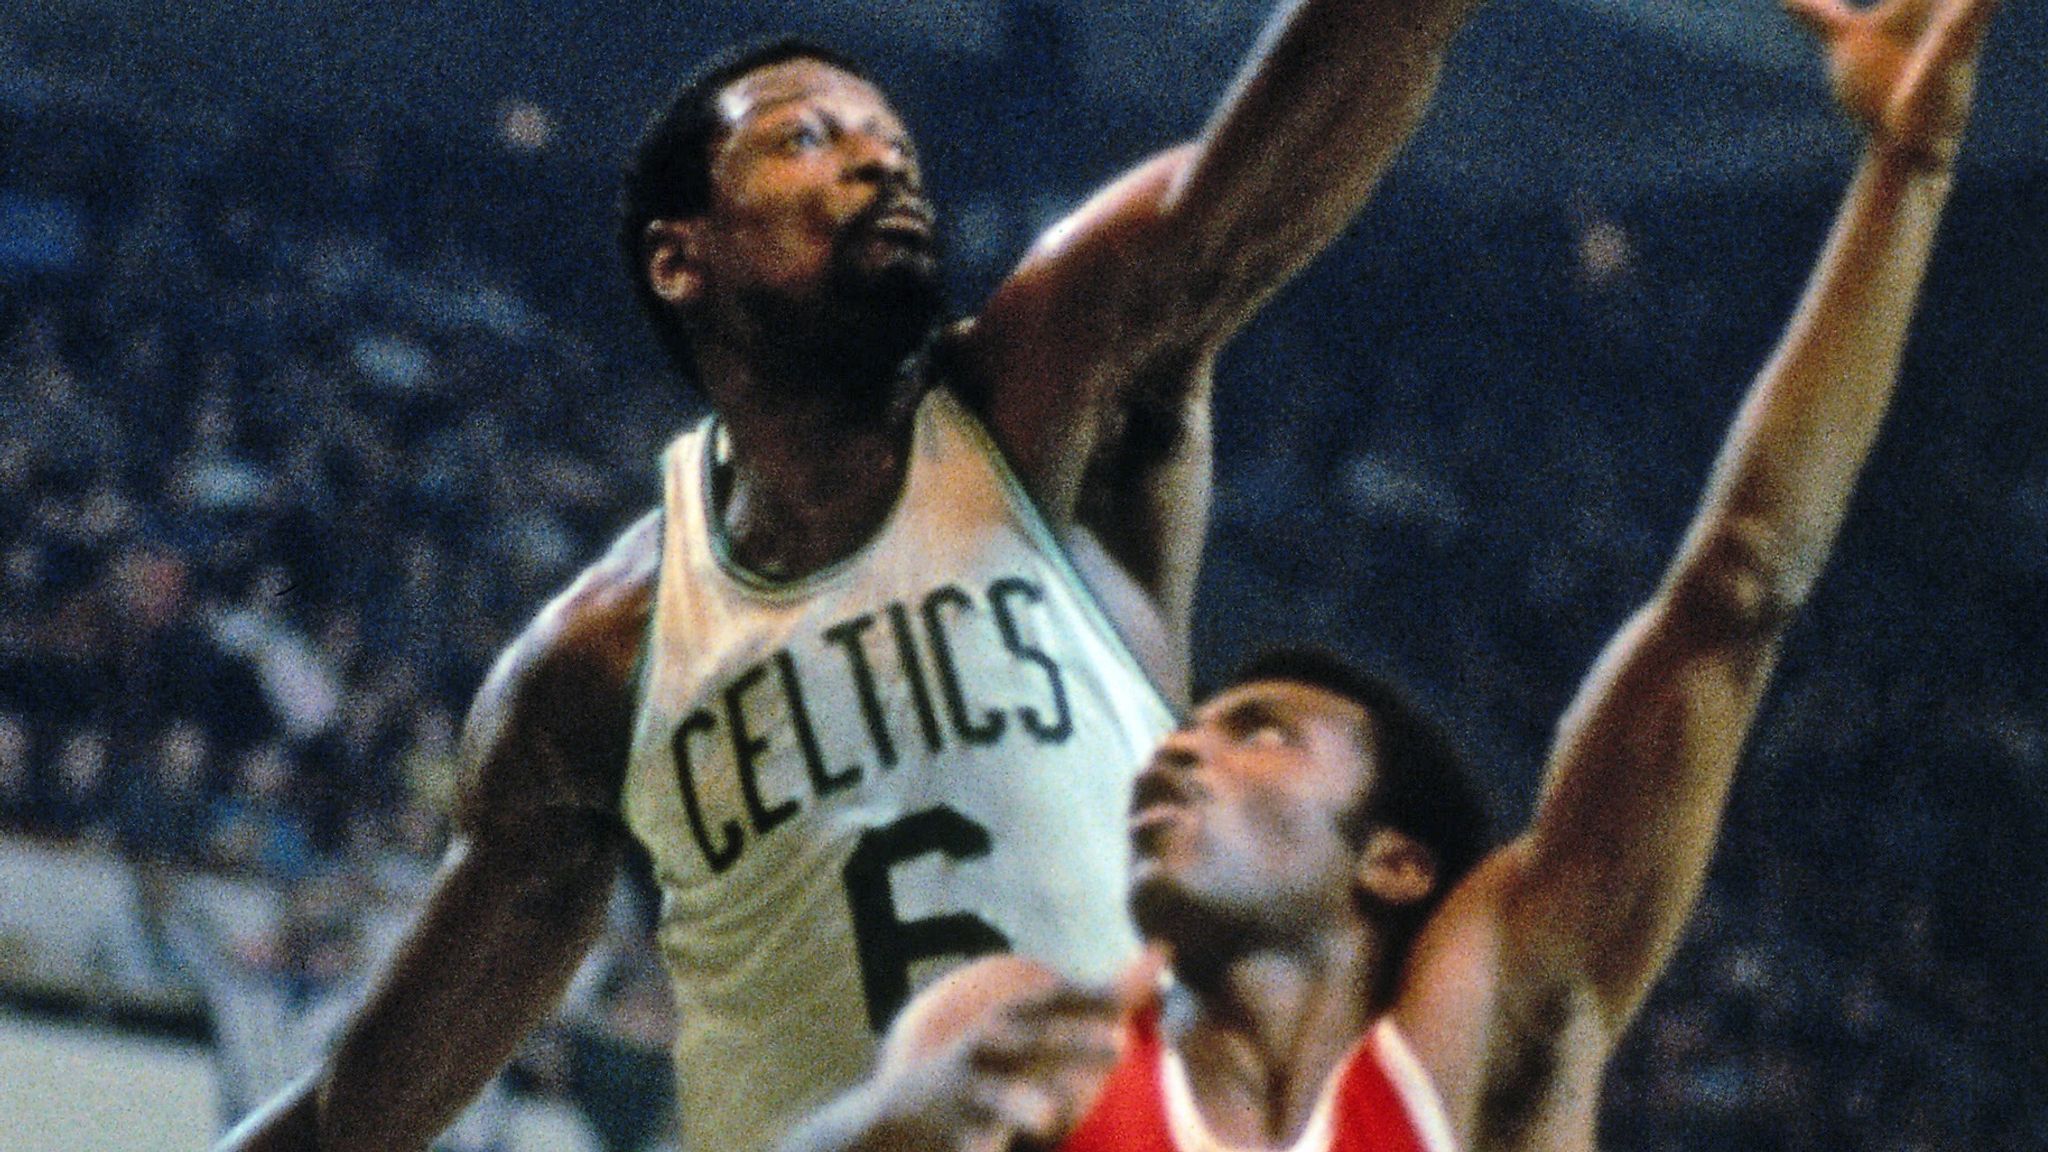 Every player in Boston Celtics history who wore No. 34